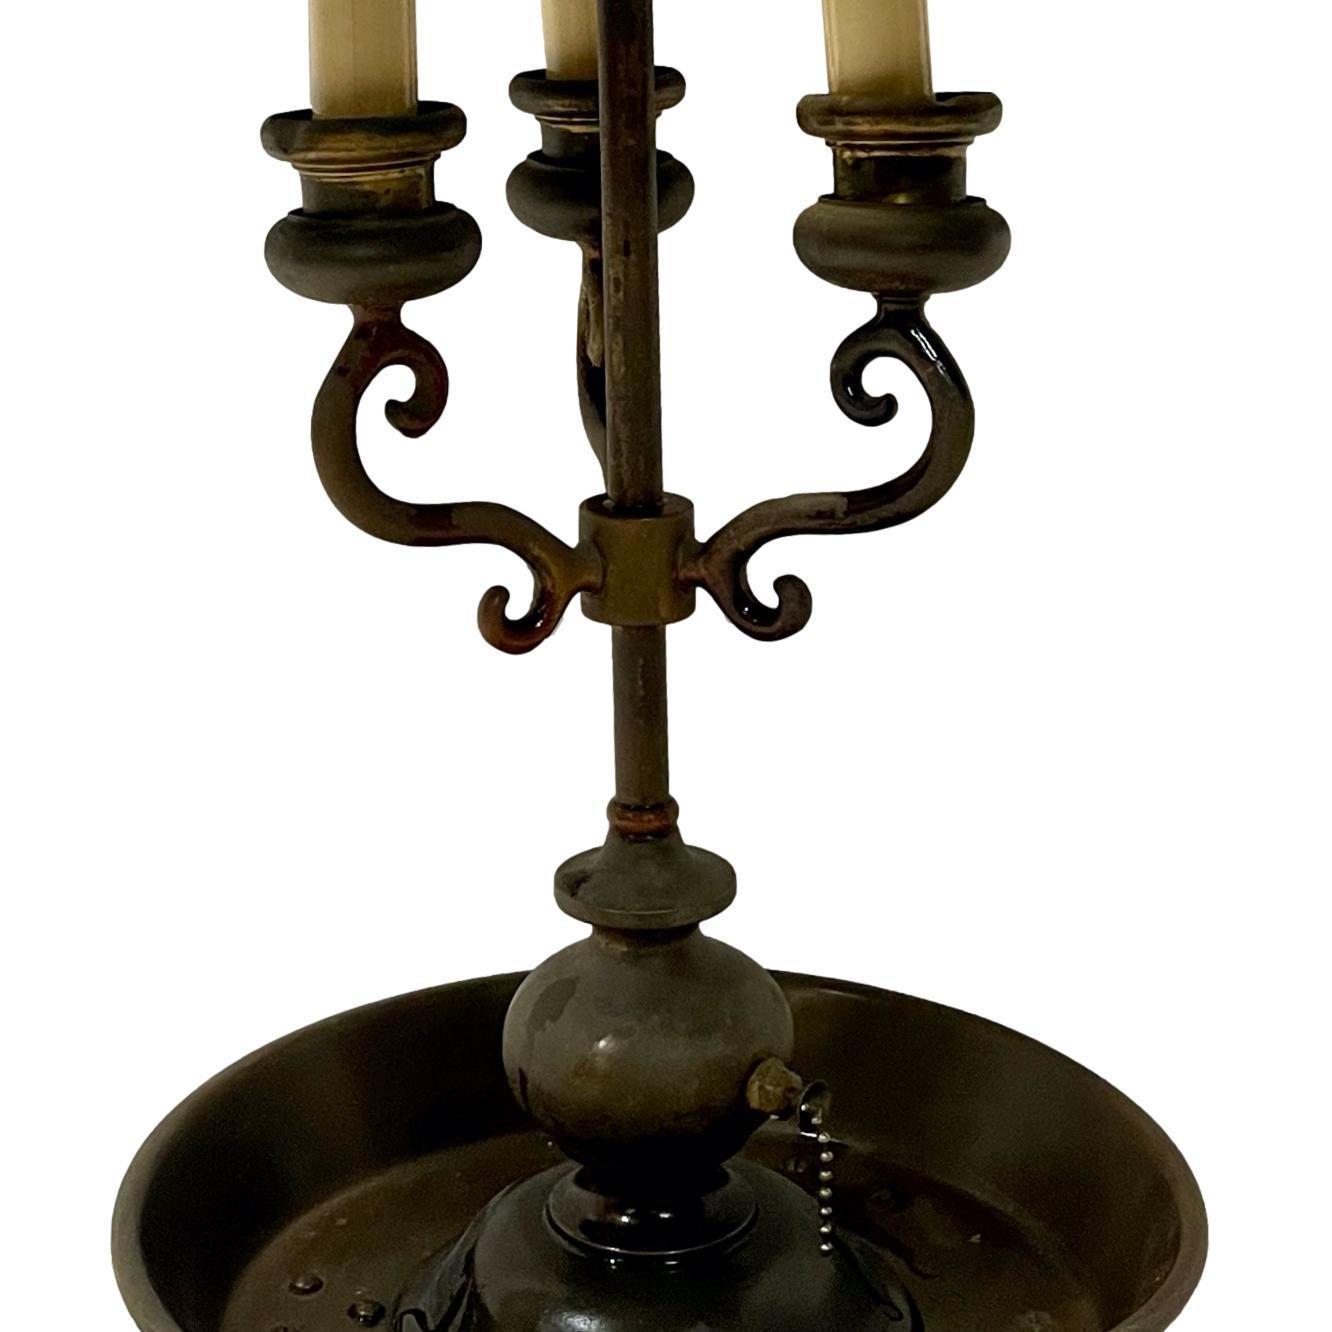 A circa 1940's English patinated bronze lamp with tole shade.

Measurements:
Height: 27.5